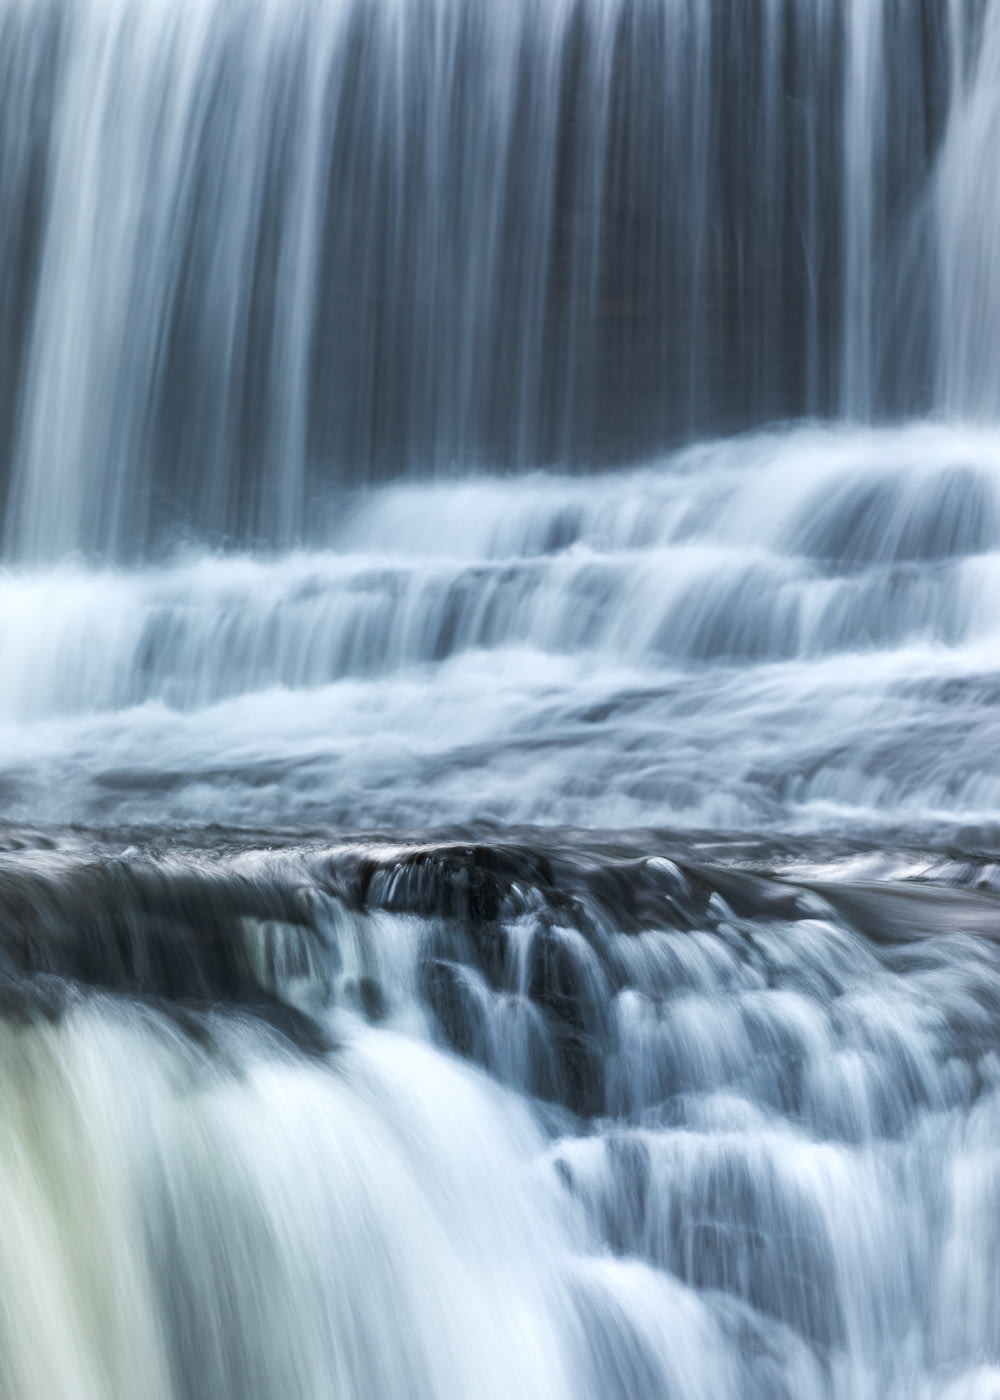 time lapse photography of water falls